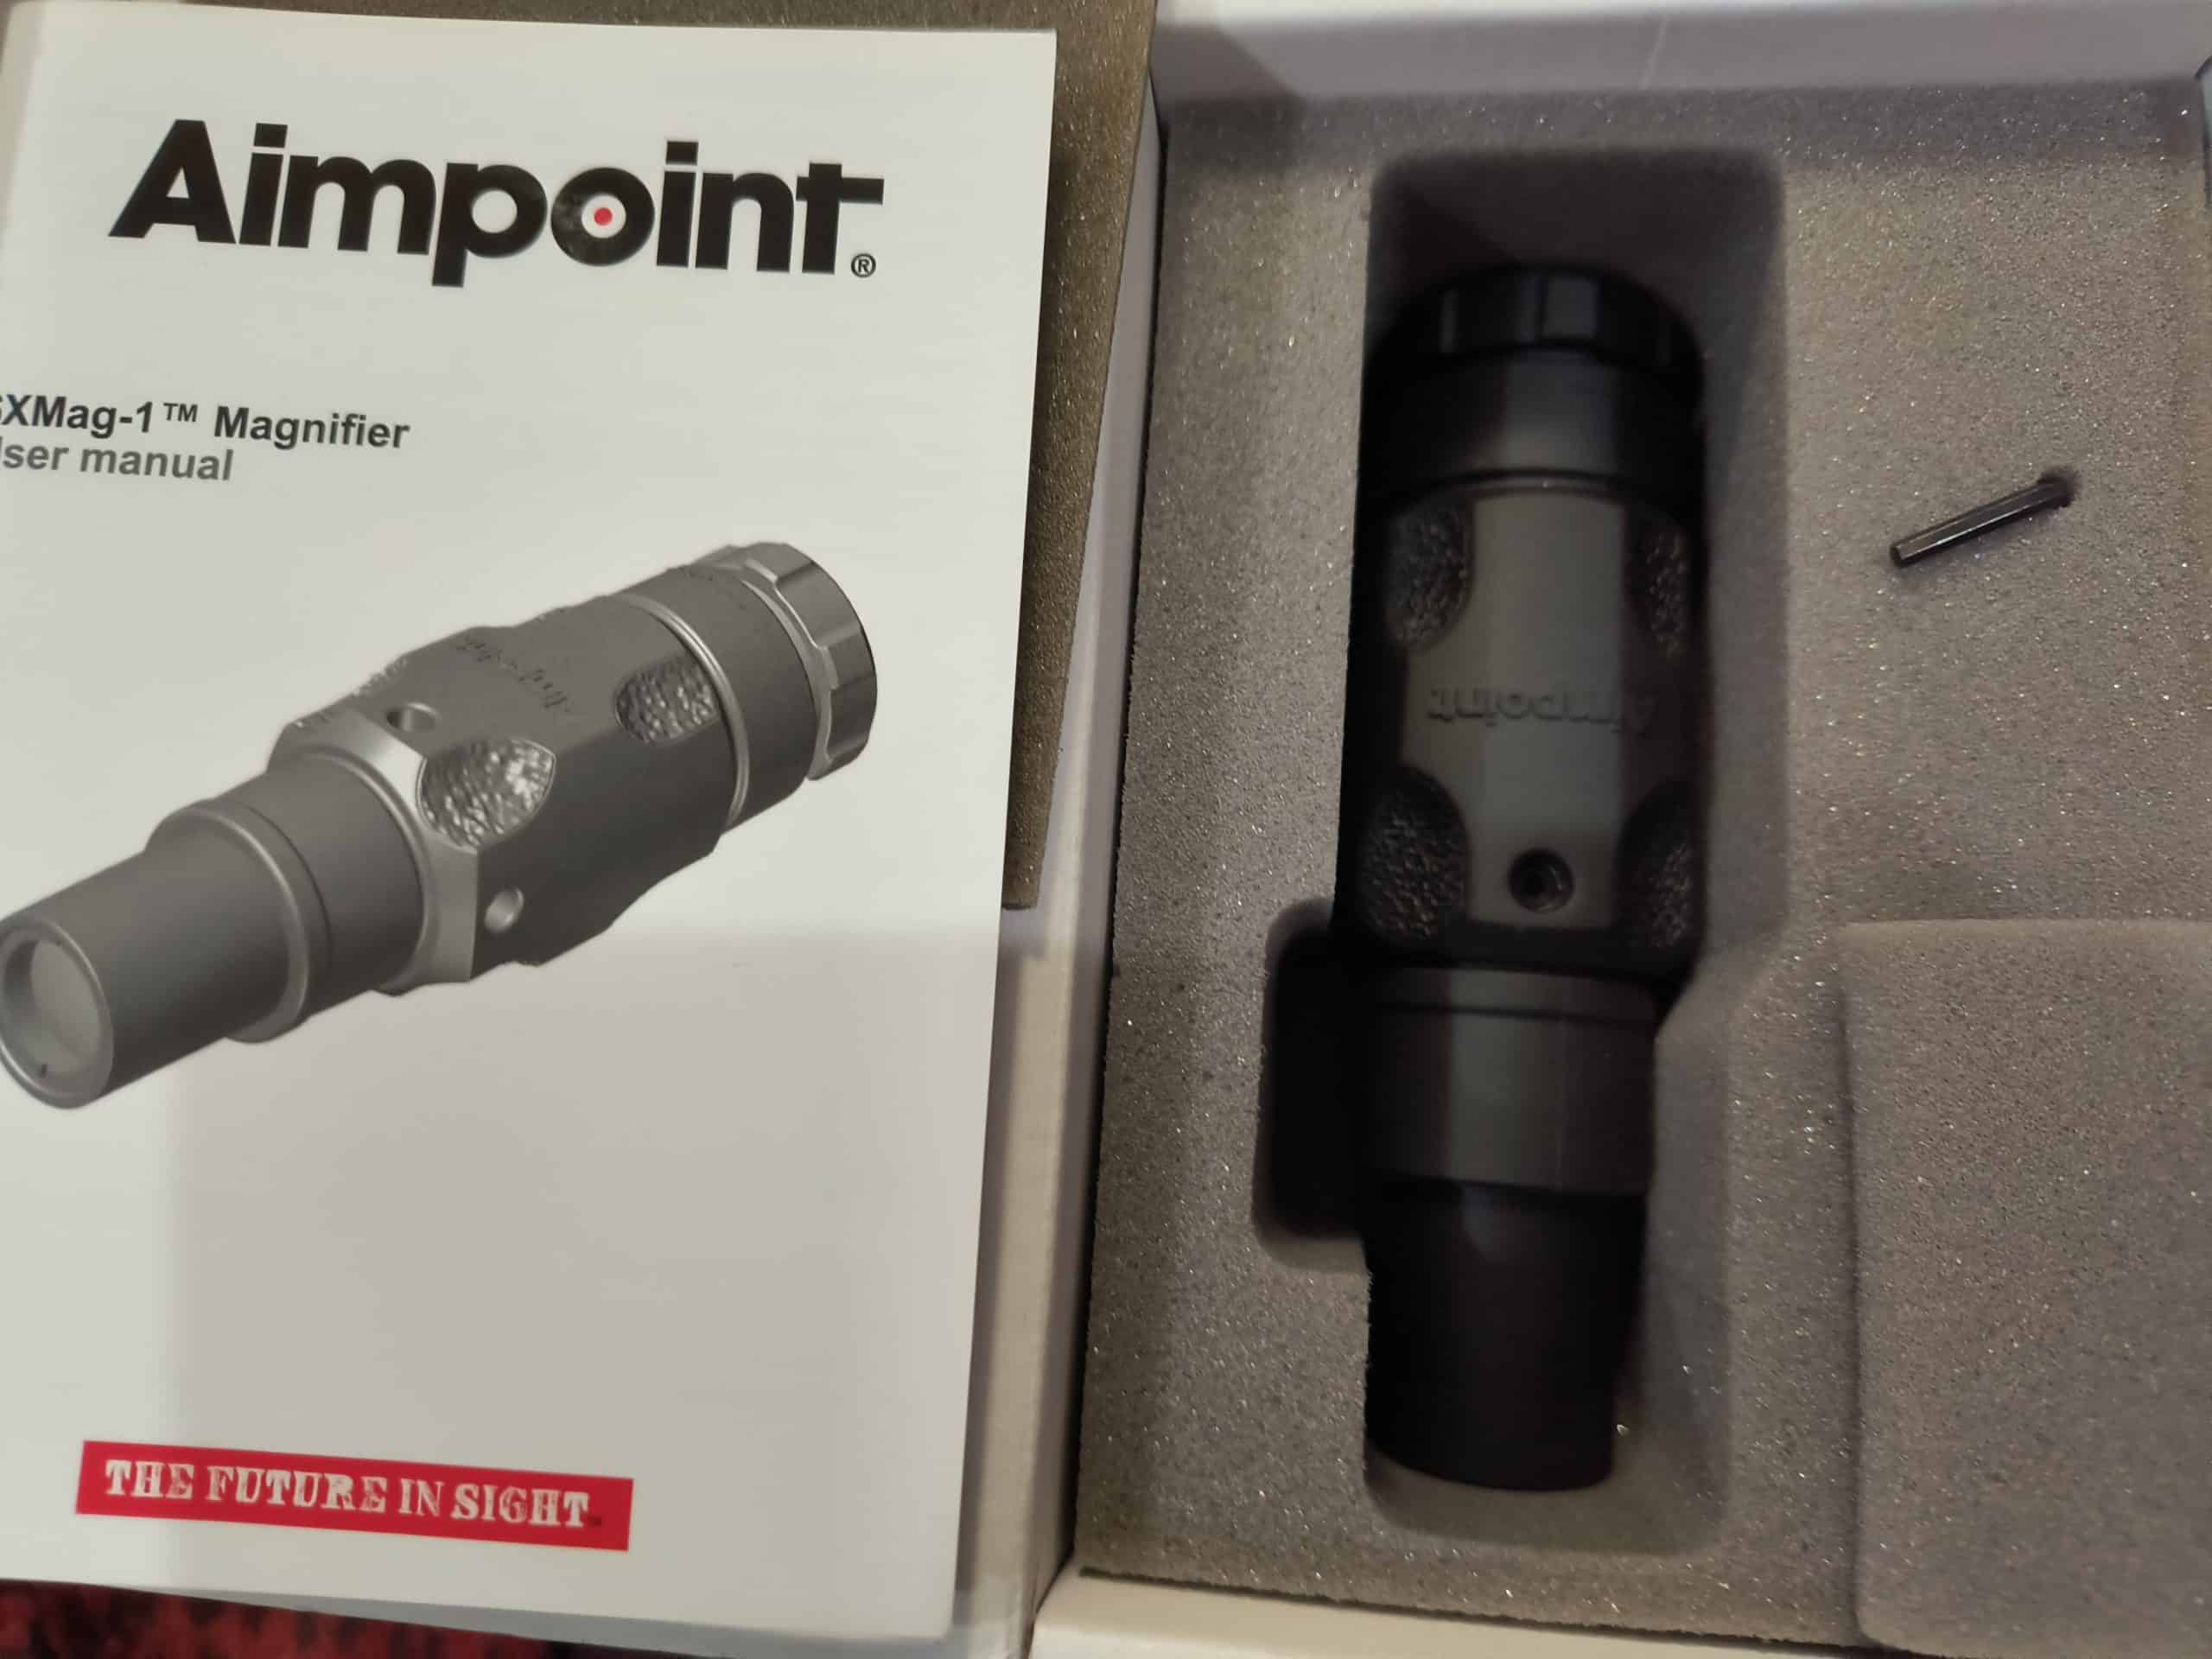 Aimpoint 6XMag-1™ Magnifier